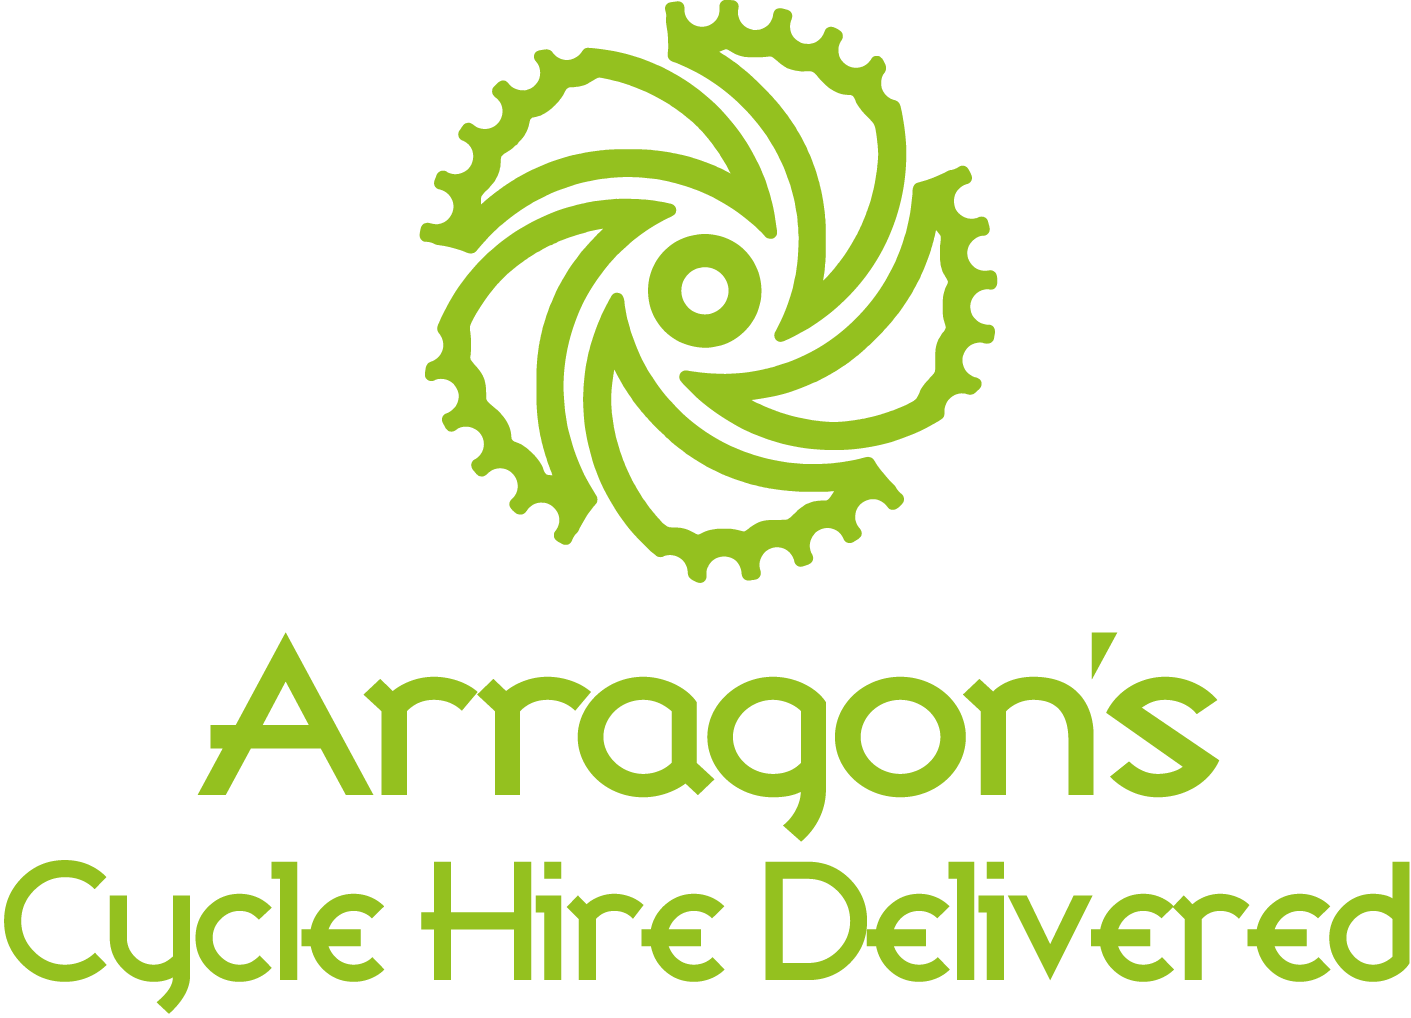 Arragons Cycle Hire Delivered 